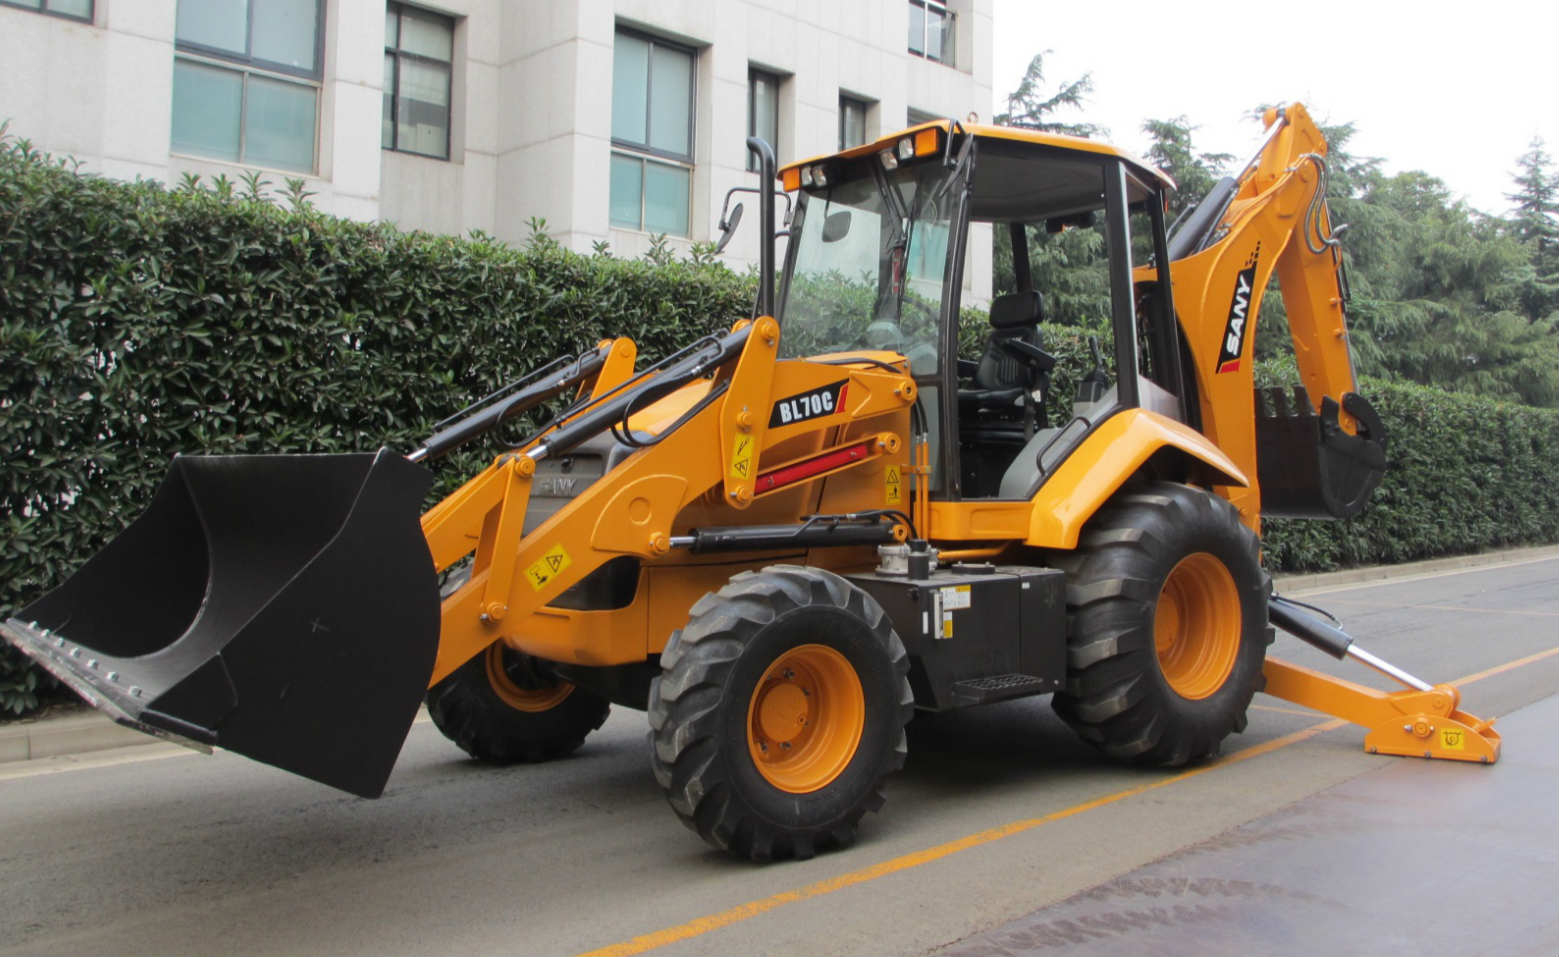 SANY wheeled excavator BL70C lands in the United States